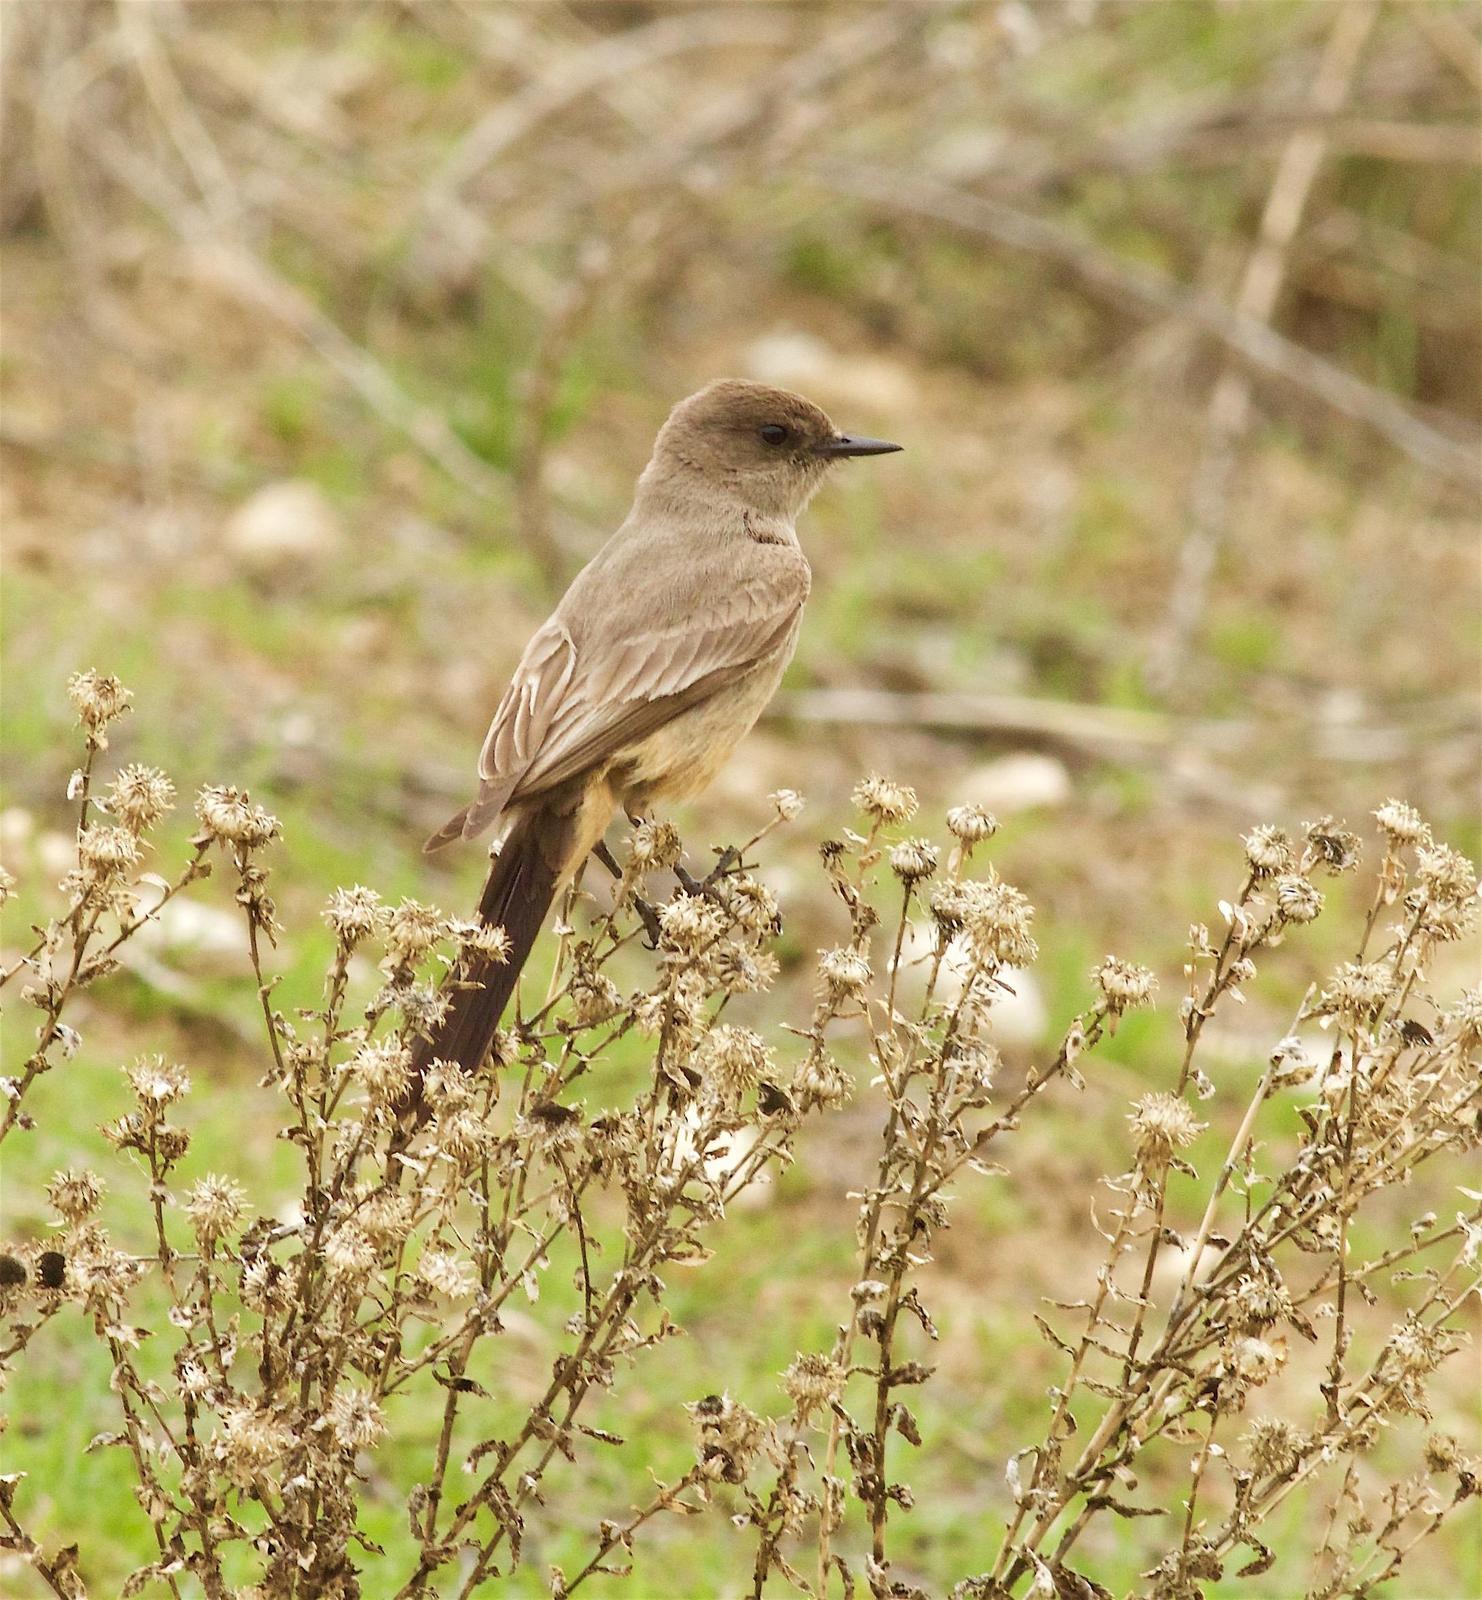 Say's Phoebe Photo by Kathryn Keith